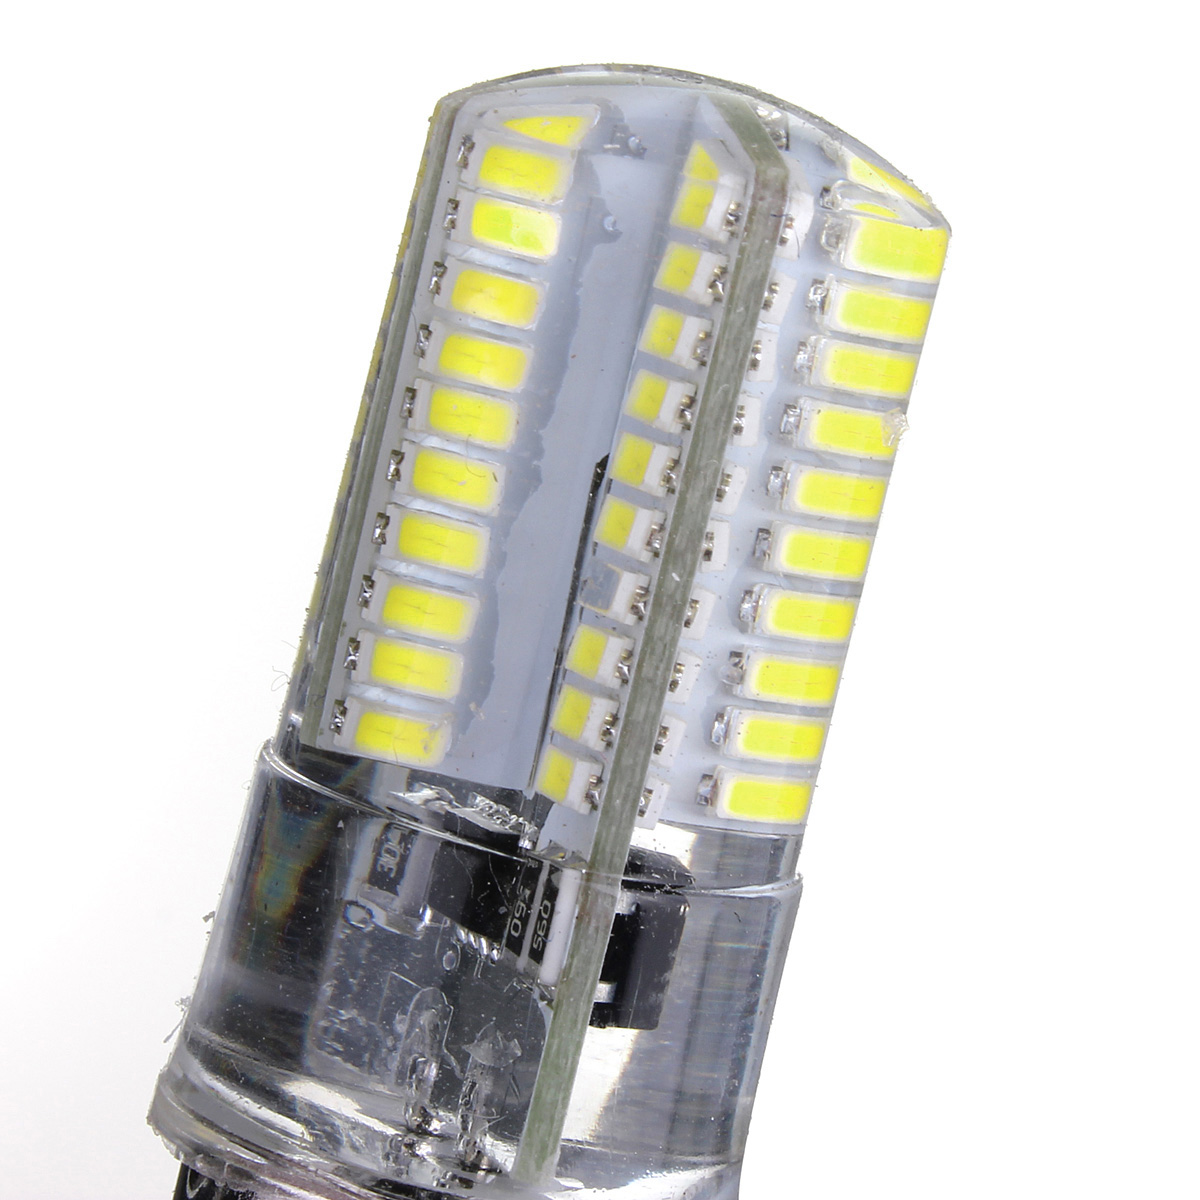 110-120V-3W-80LED-3014-SMD-E12-LED-Dimmable-Silicone-Crystal-Bulb-964373-6